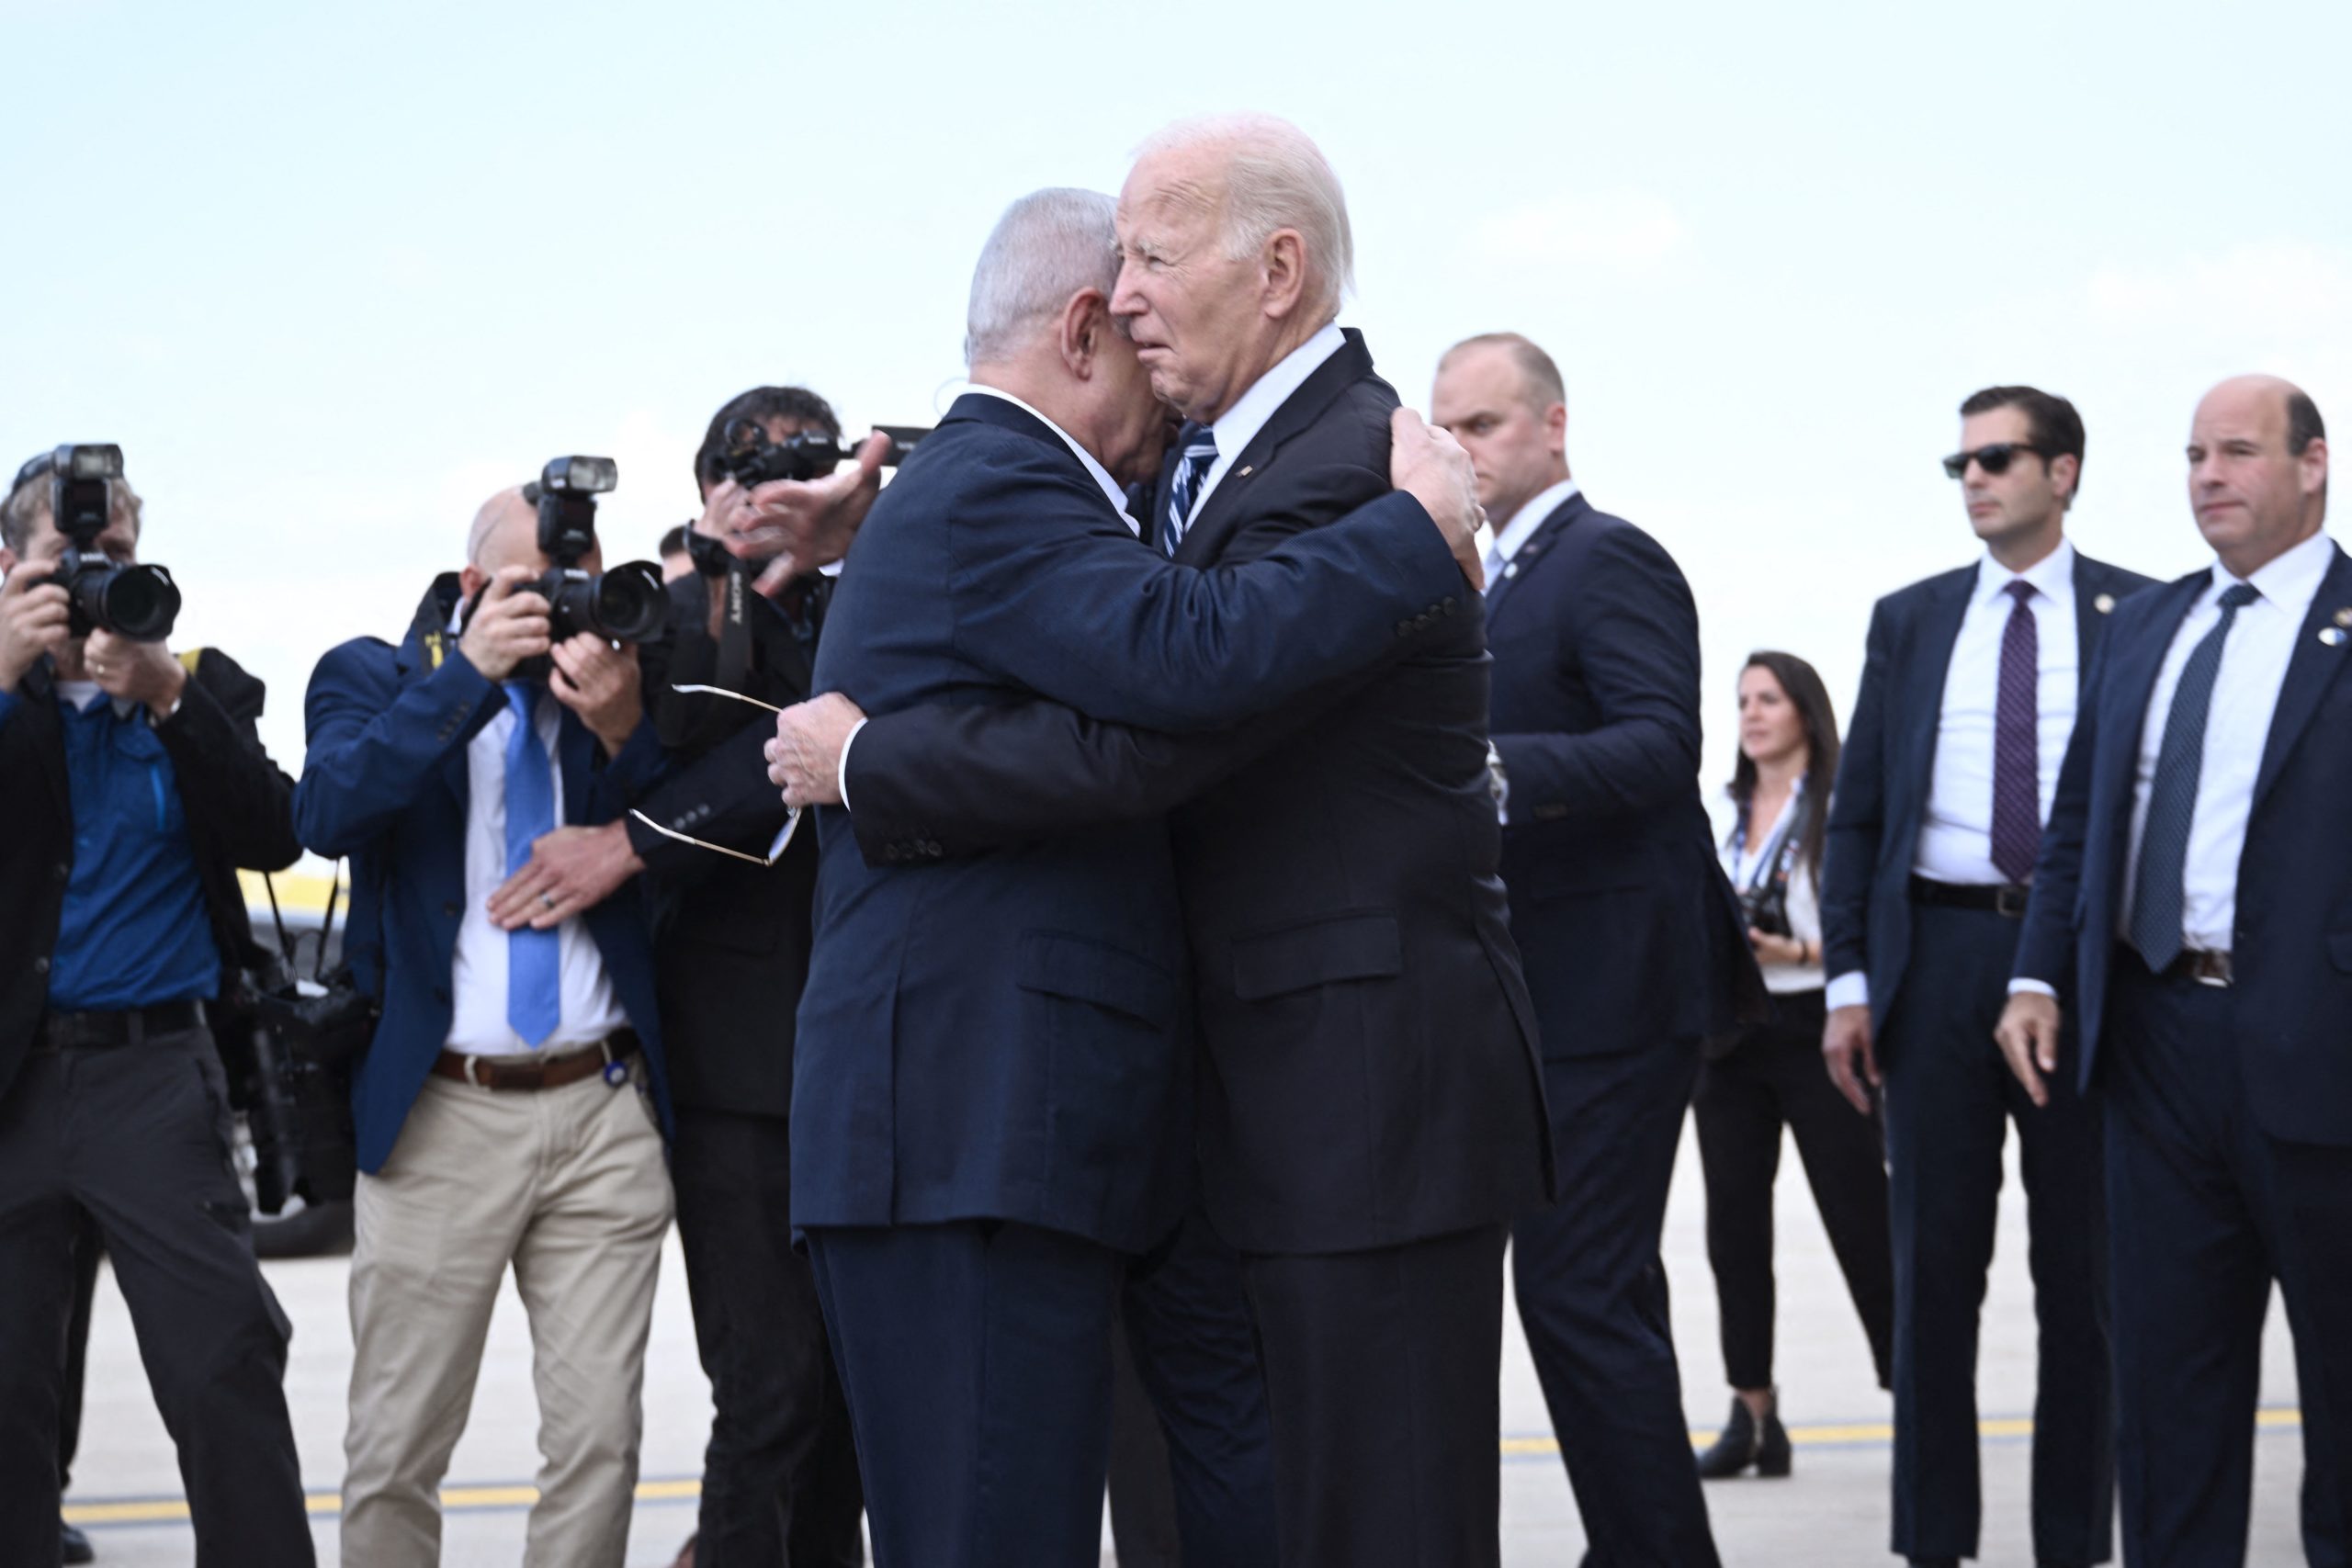 Israel Prime Minister Benjamin Netanyahu (L) hugs US President Joe Biden upon his arrival at Tel Aviv's Ben Gurion airport on October 18, 2023, amid the ongoing battles between Israel and the Palestinian group Hamas. Biden landed in Israel on October 18, on a solidarity visit following Hamas attacks that have led to major Israeli reprisals. (Photo by Brendan SMIALOWSKI / AFP) (Photo by BRENDAN SMIALOWSKI/AFP via Getty Images)